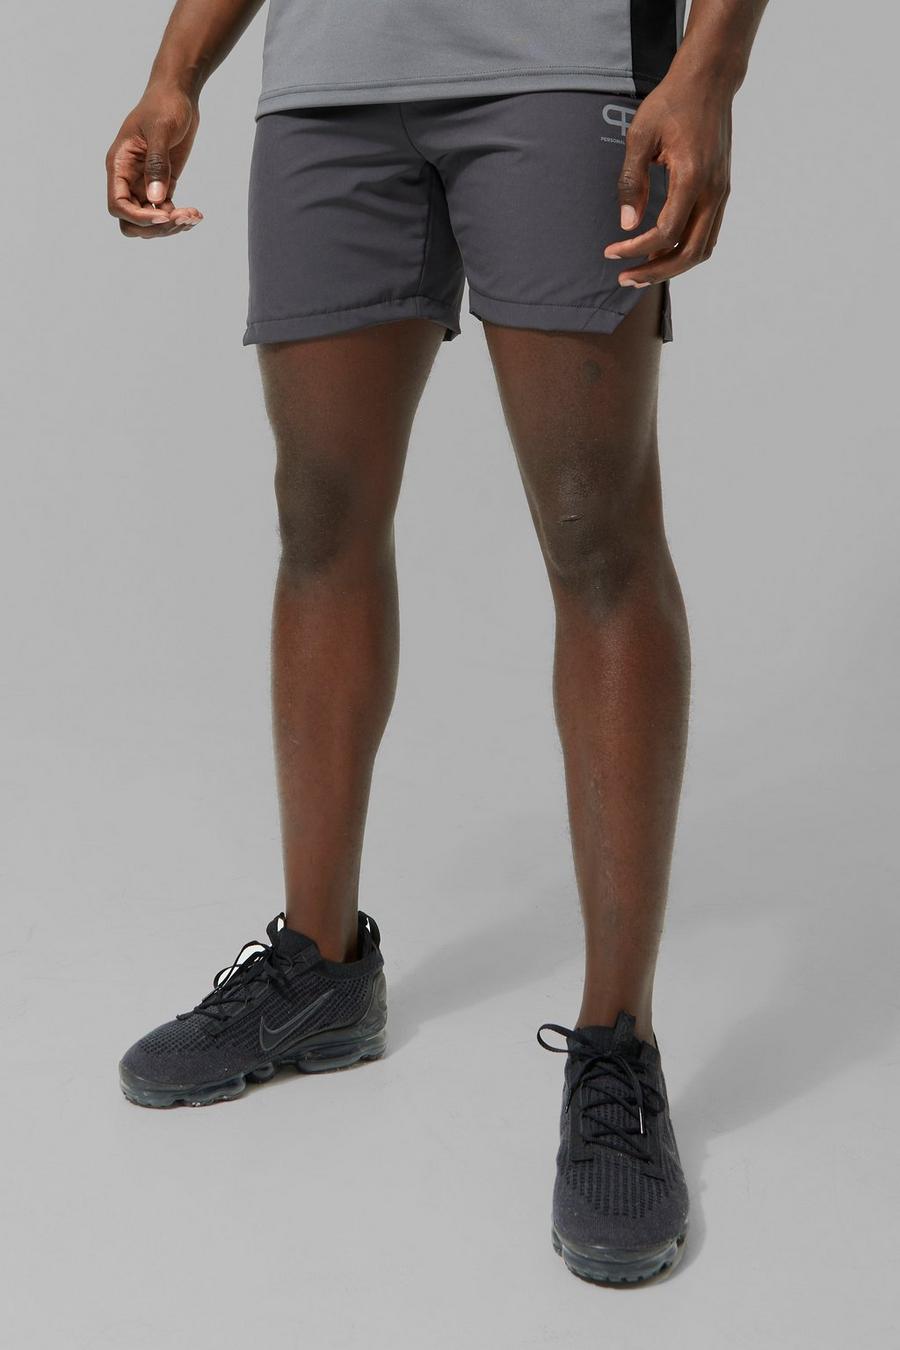 Man Active X Pr Performance Gym-Shorts, Charcoal image number 1